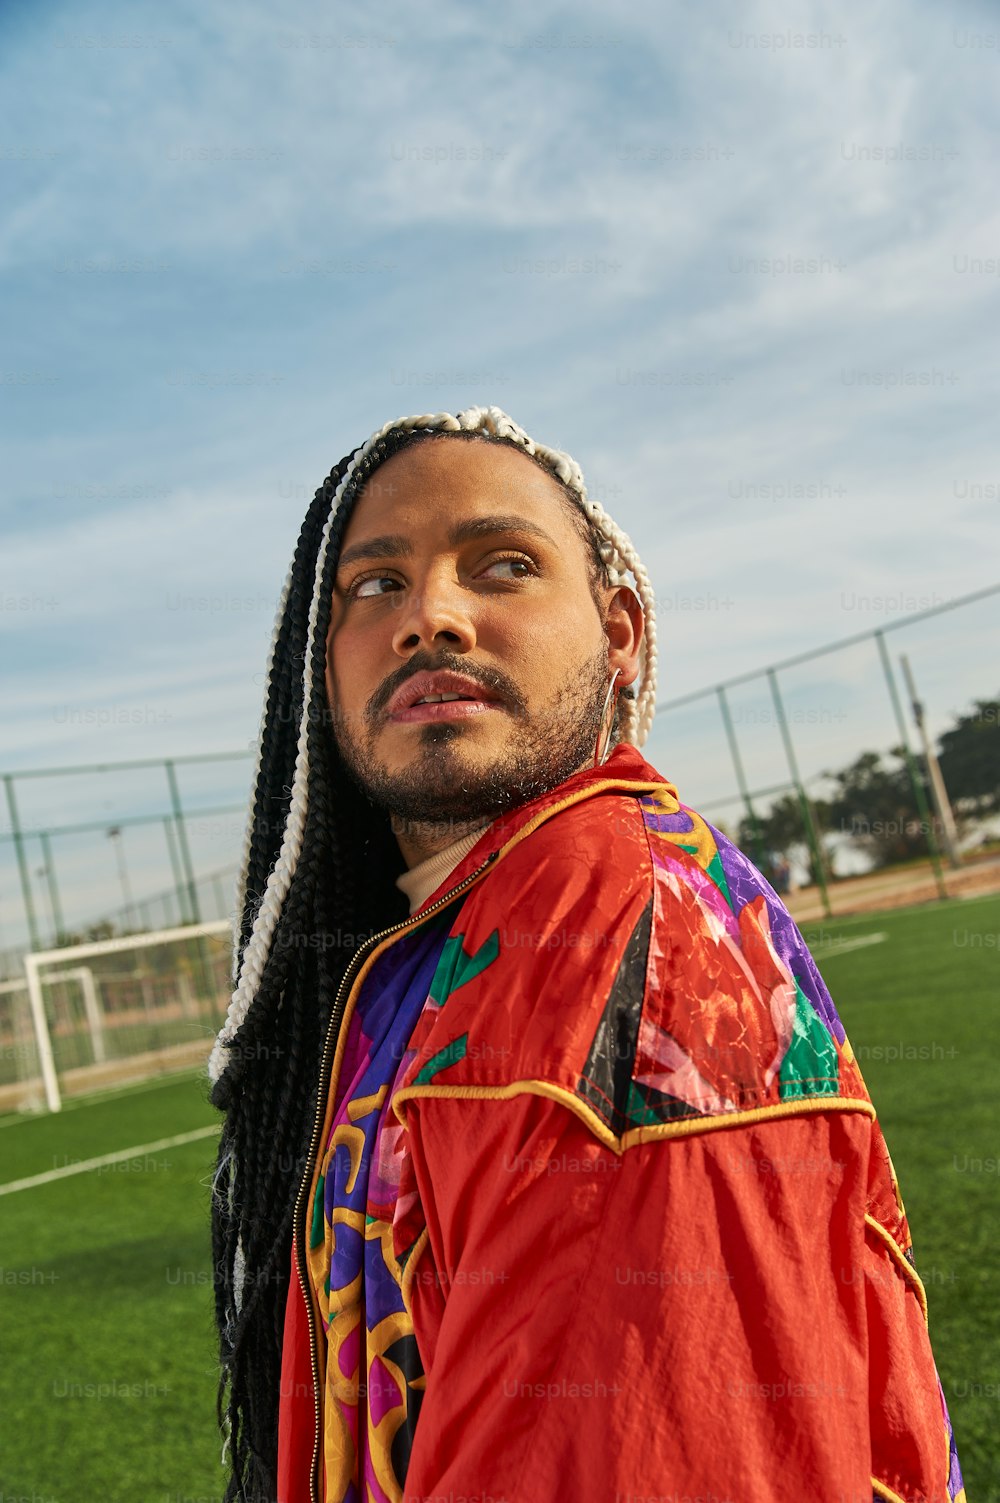 a man with dreadlocks standing on a soccer field